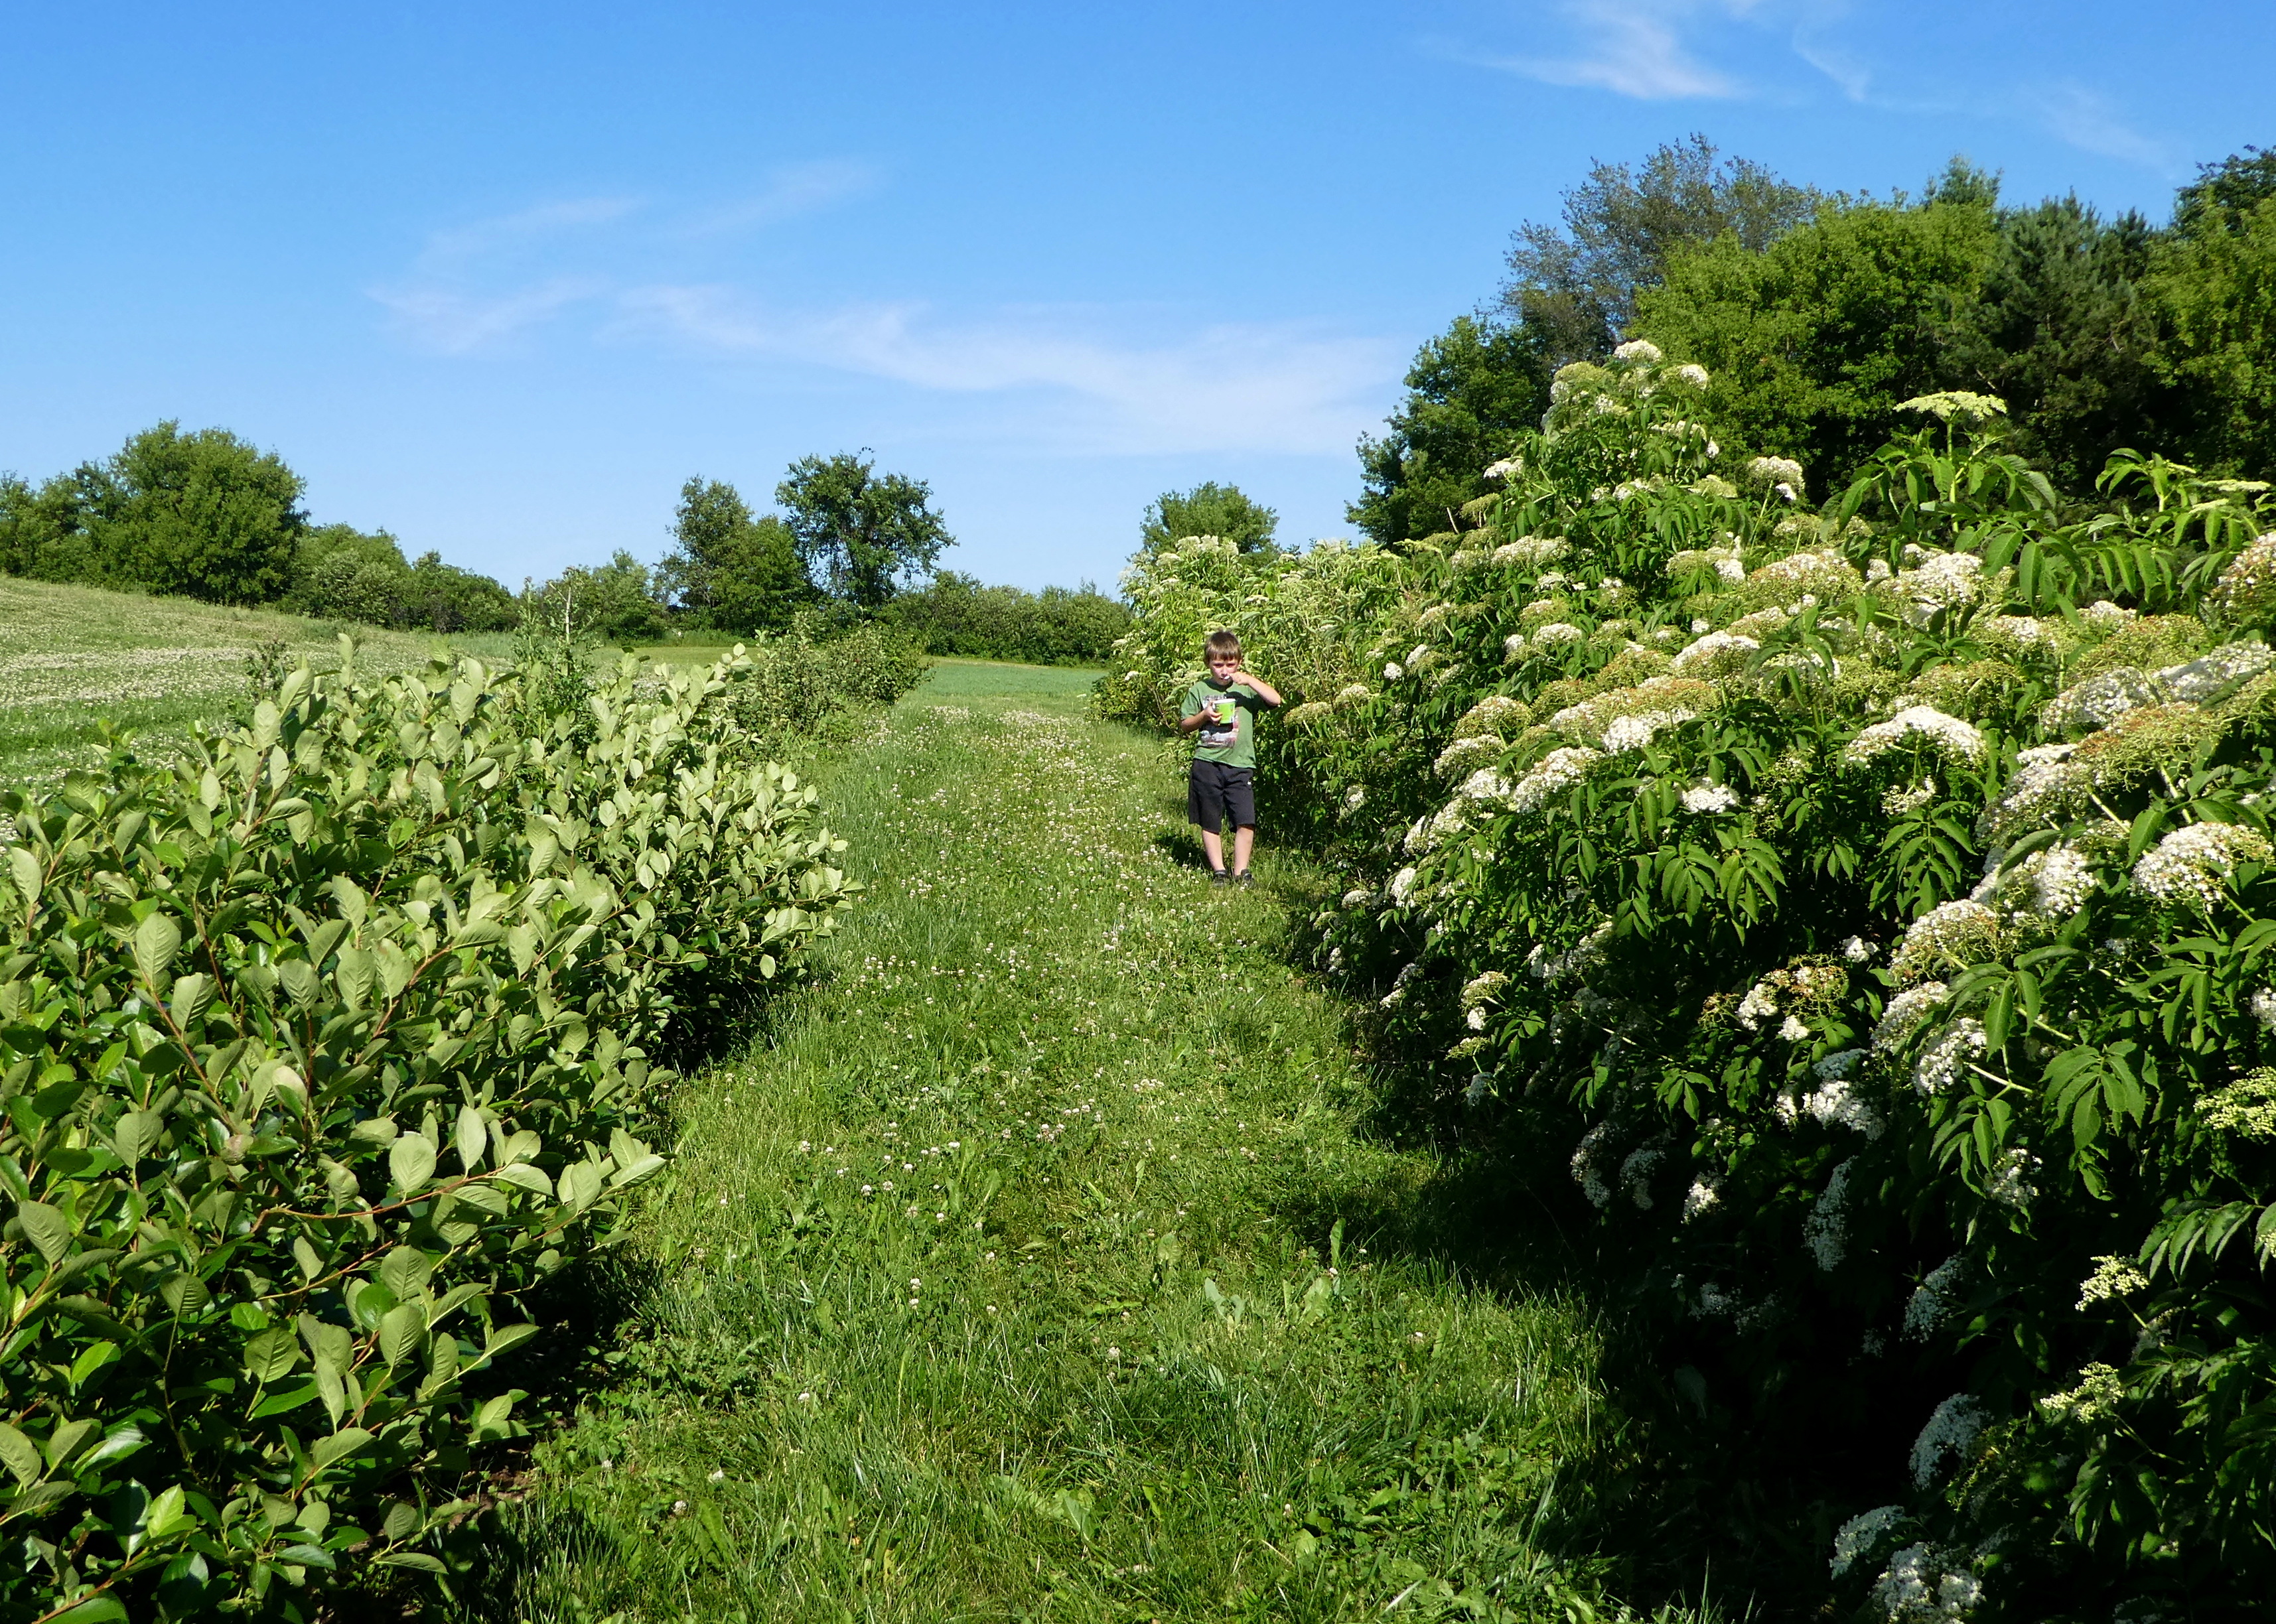 A kid stands in a verdant landscape with blue sky. He is putting something into his mouth as he stands near a hedgerow with fruit and flowers on it.